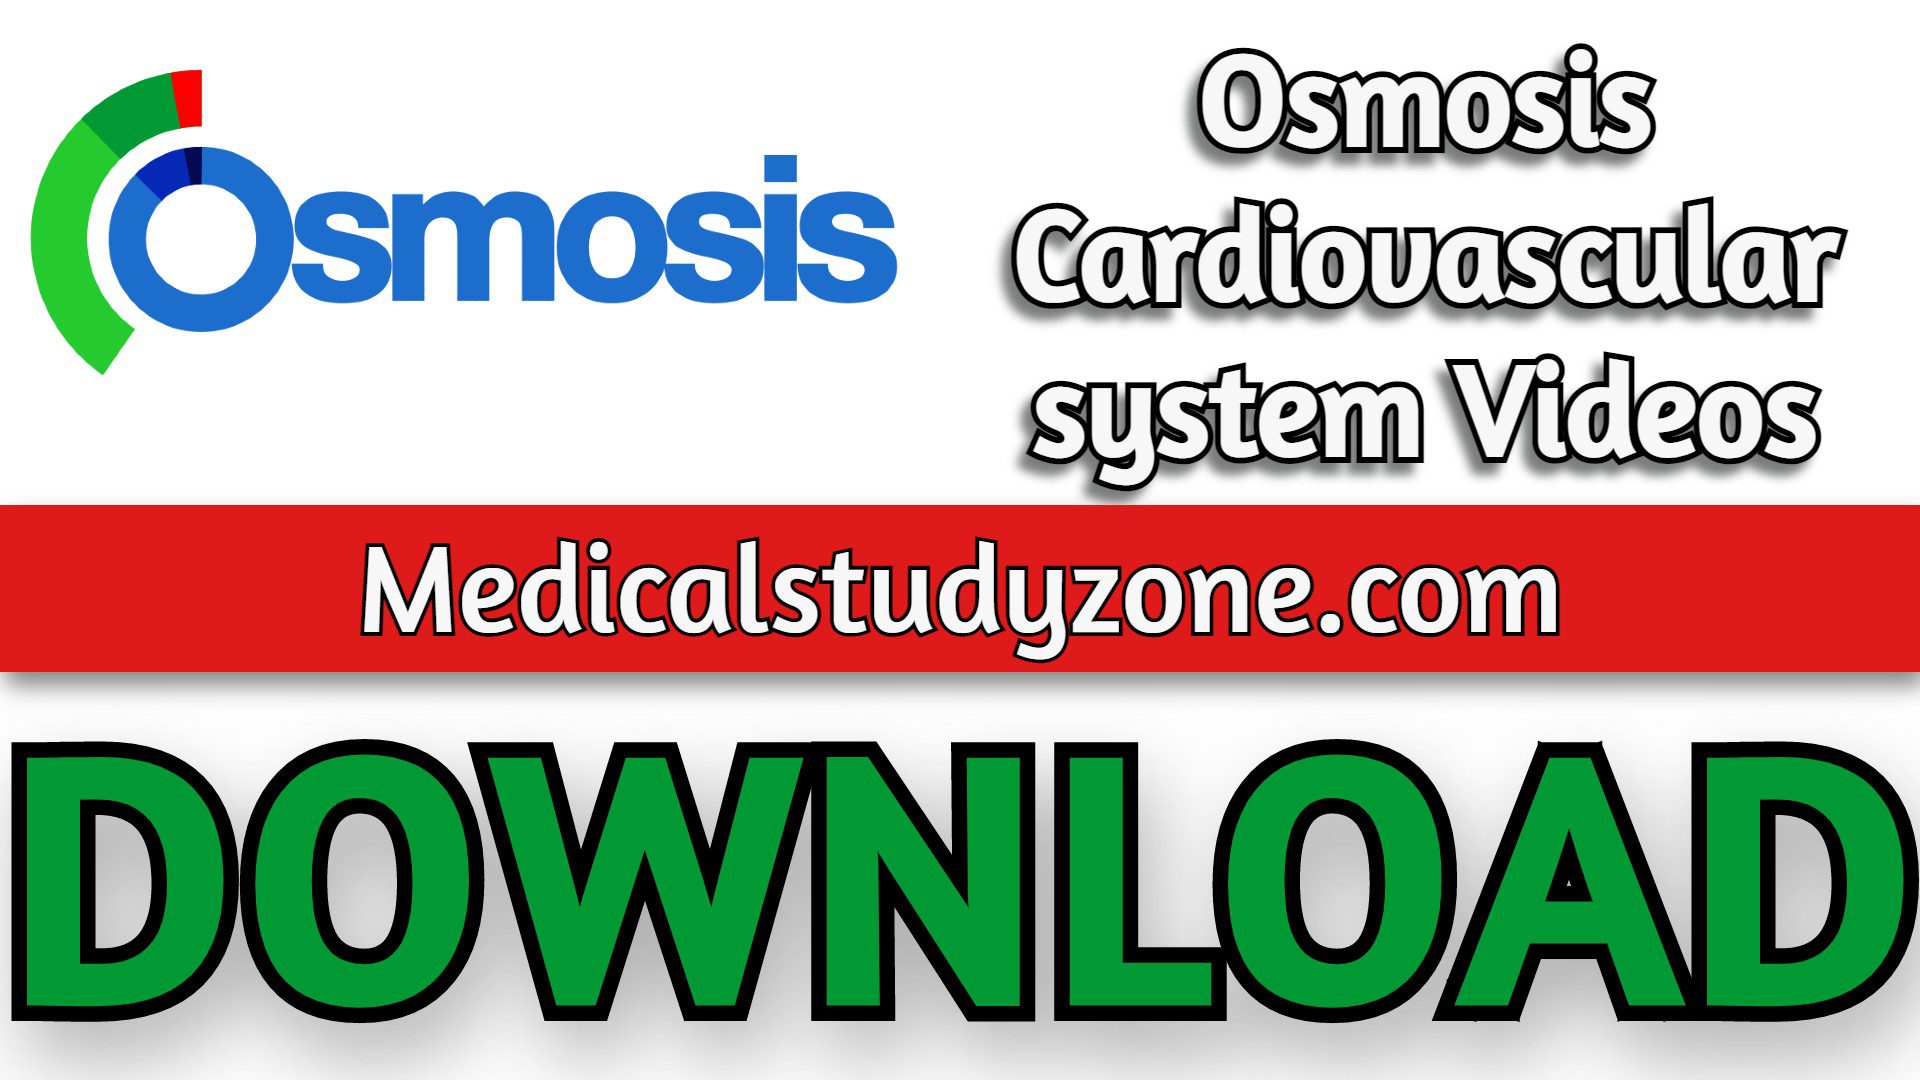 Osmosis Cardiovascular system Videos 2021 Free Download